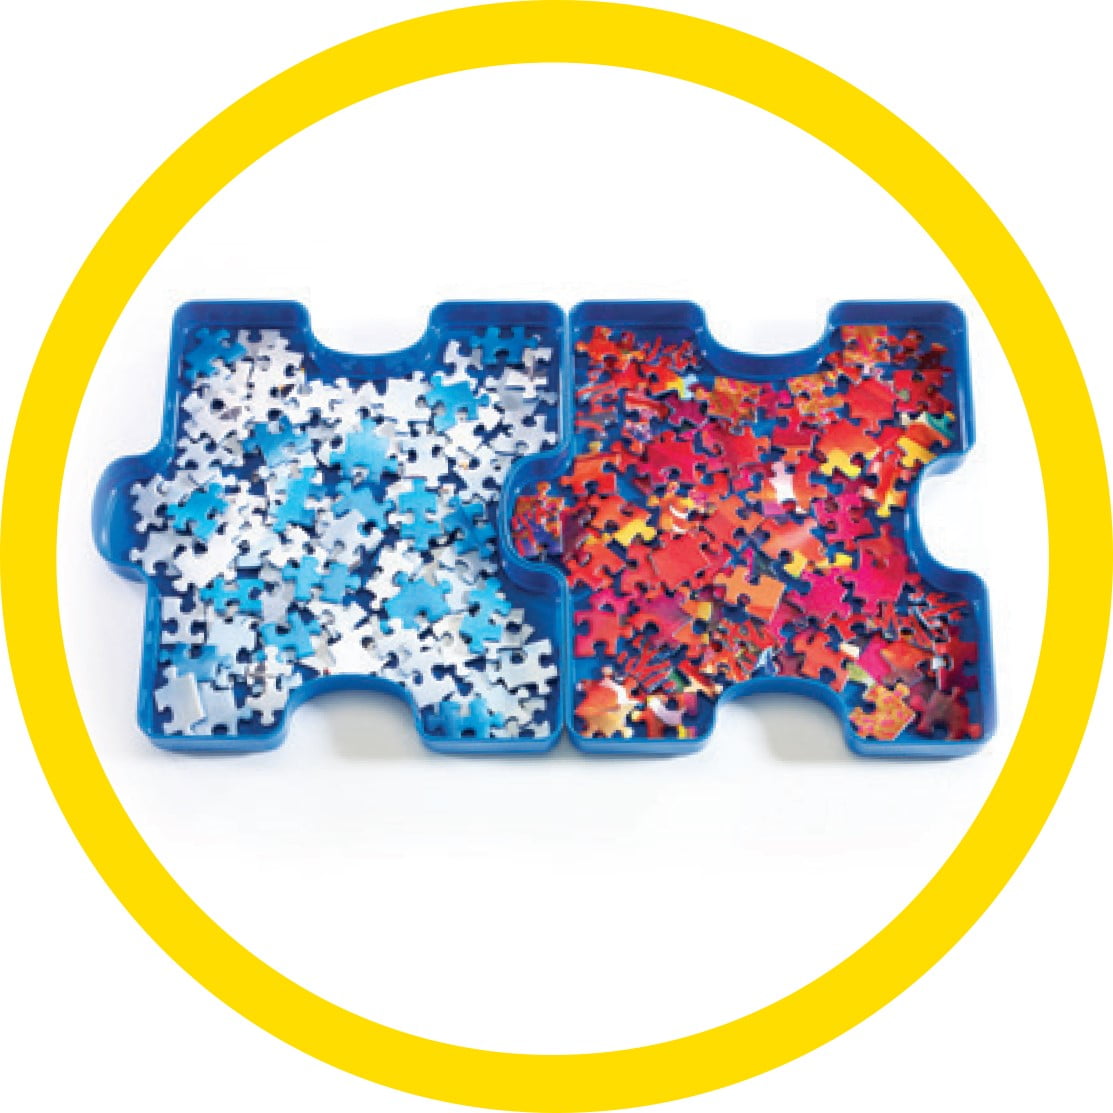 Sort & Store Jigsaw Puzzle Sorting Trays – Playful Pastimes